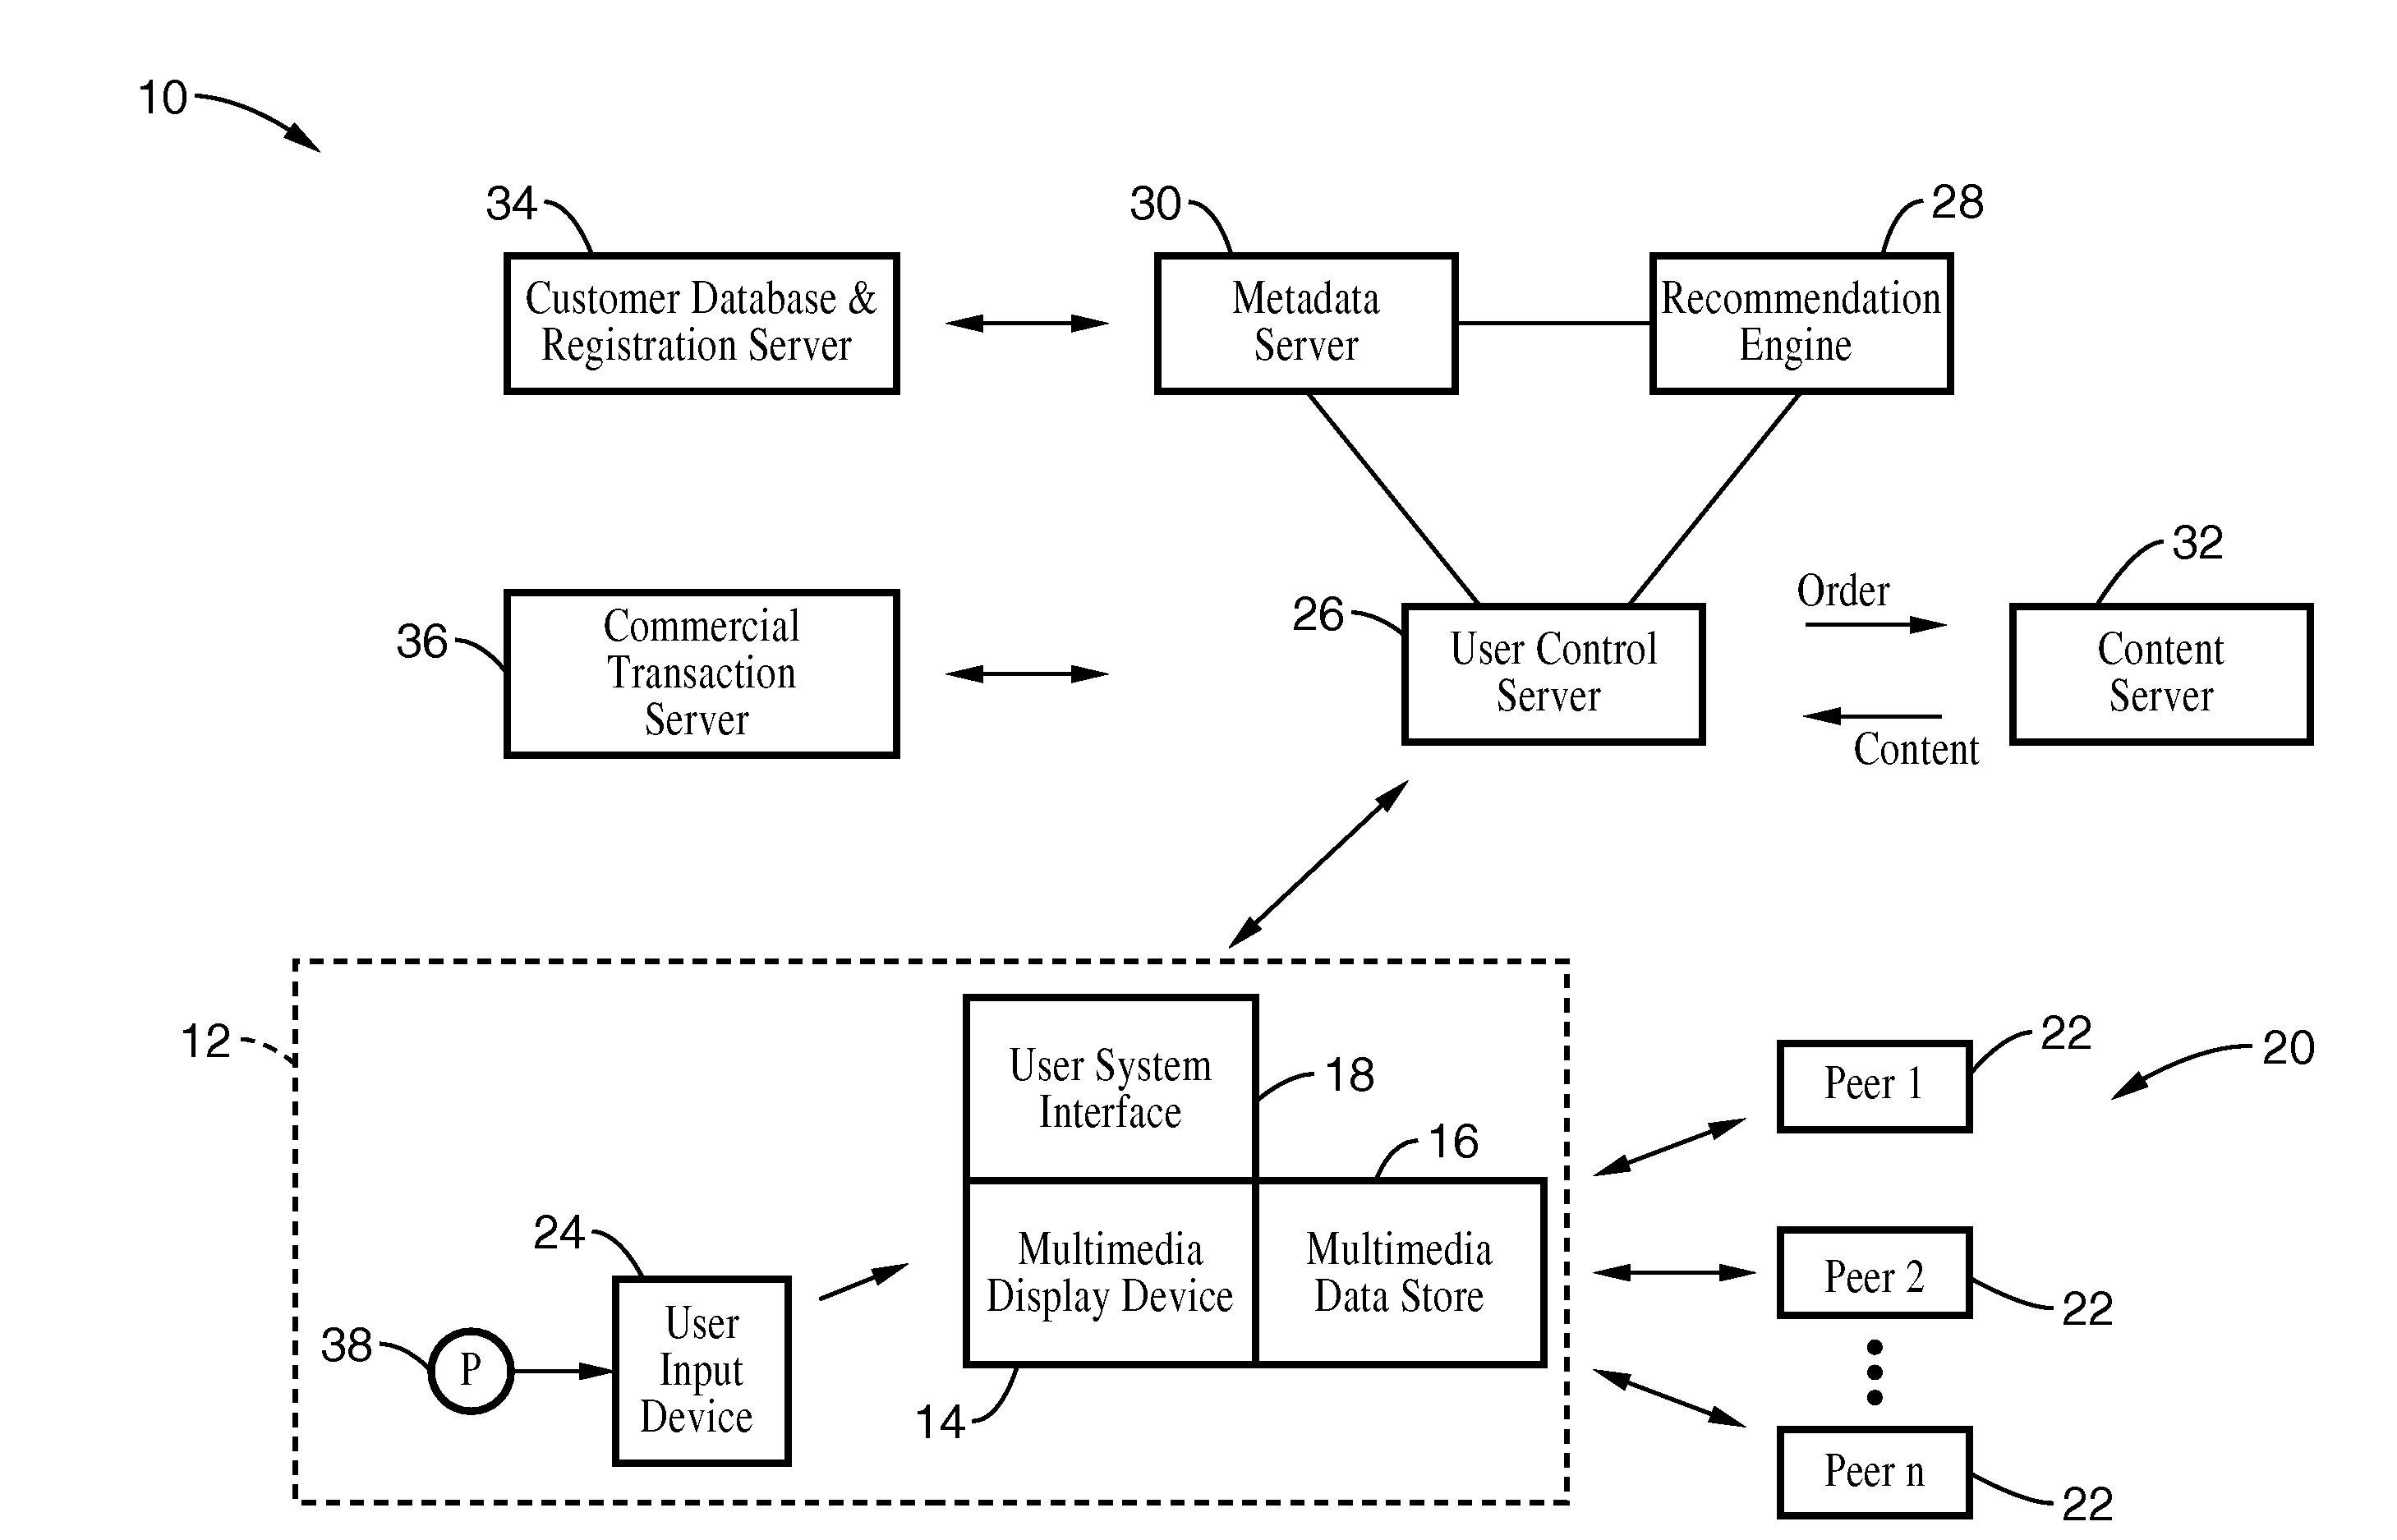 System and method of selective media content access through a recommednation engine